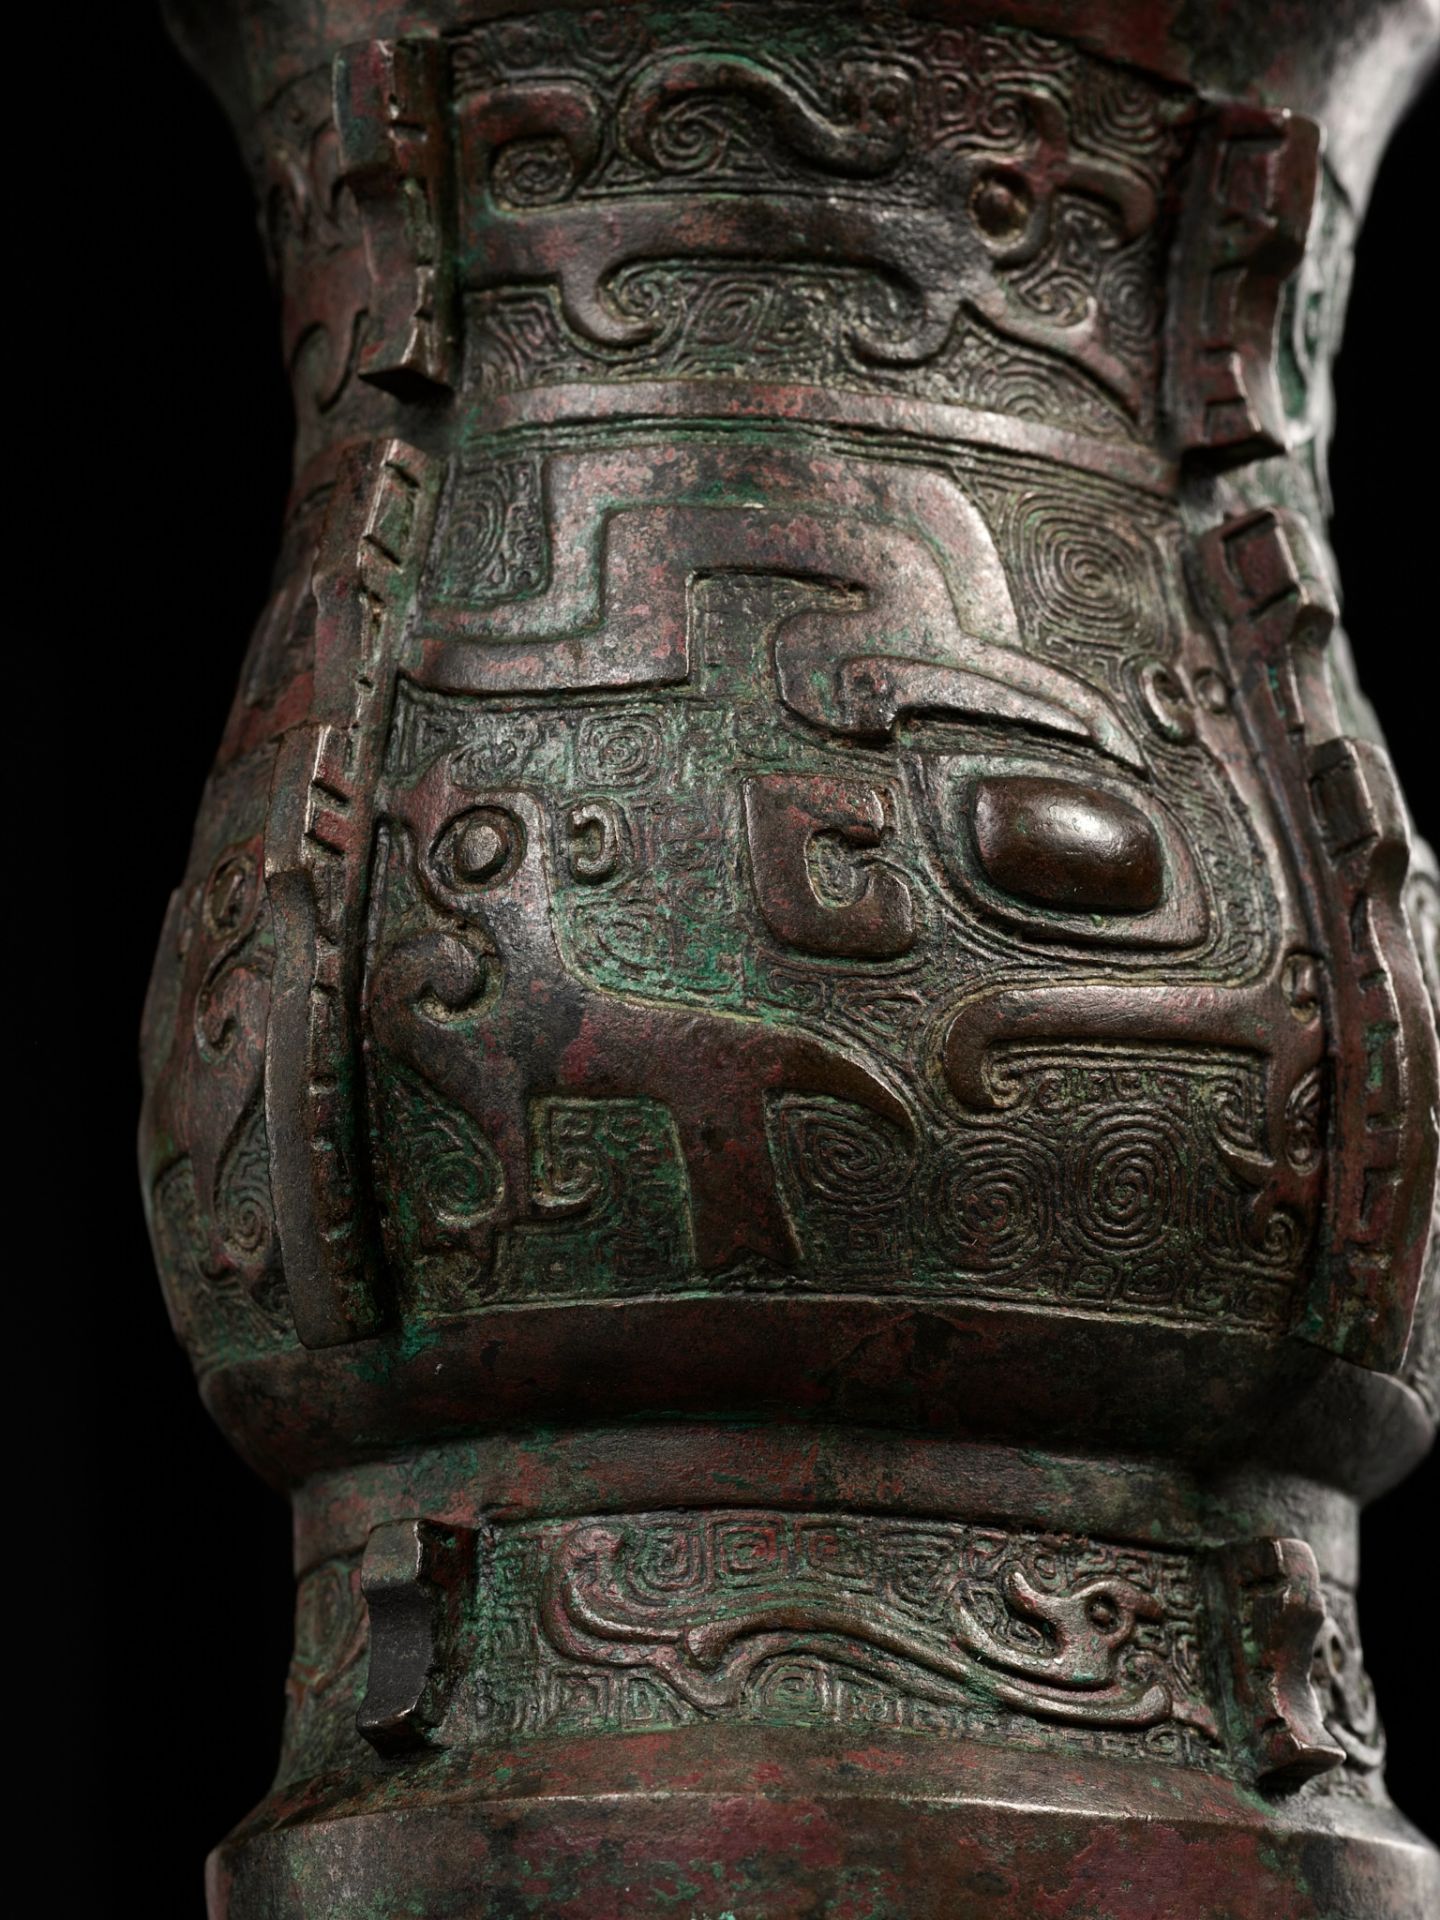 A RARE BRONZE RITUAL WINE VESSEL, ZHI, SHANG DYNASTY, CHINA, 13TH-12TH CENTURY BC - Image 23 of 25